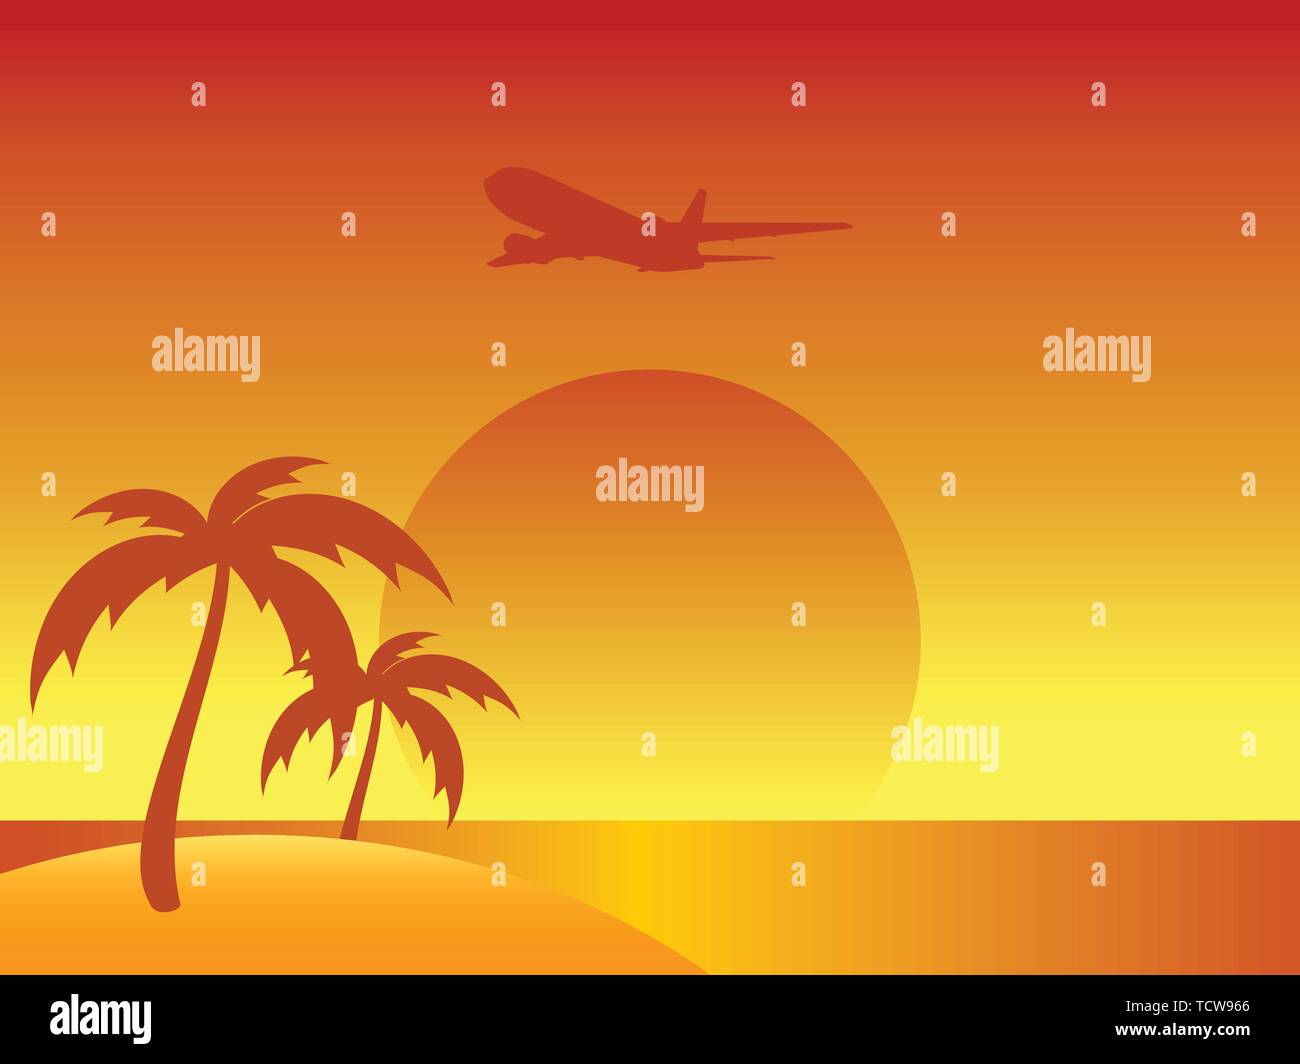 Abstract Orange and Yellow Summer Background With Silhouette Palm Trees and Airplane Over Sunset From a Tropical Island Stock Vector